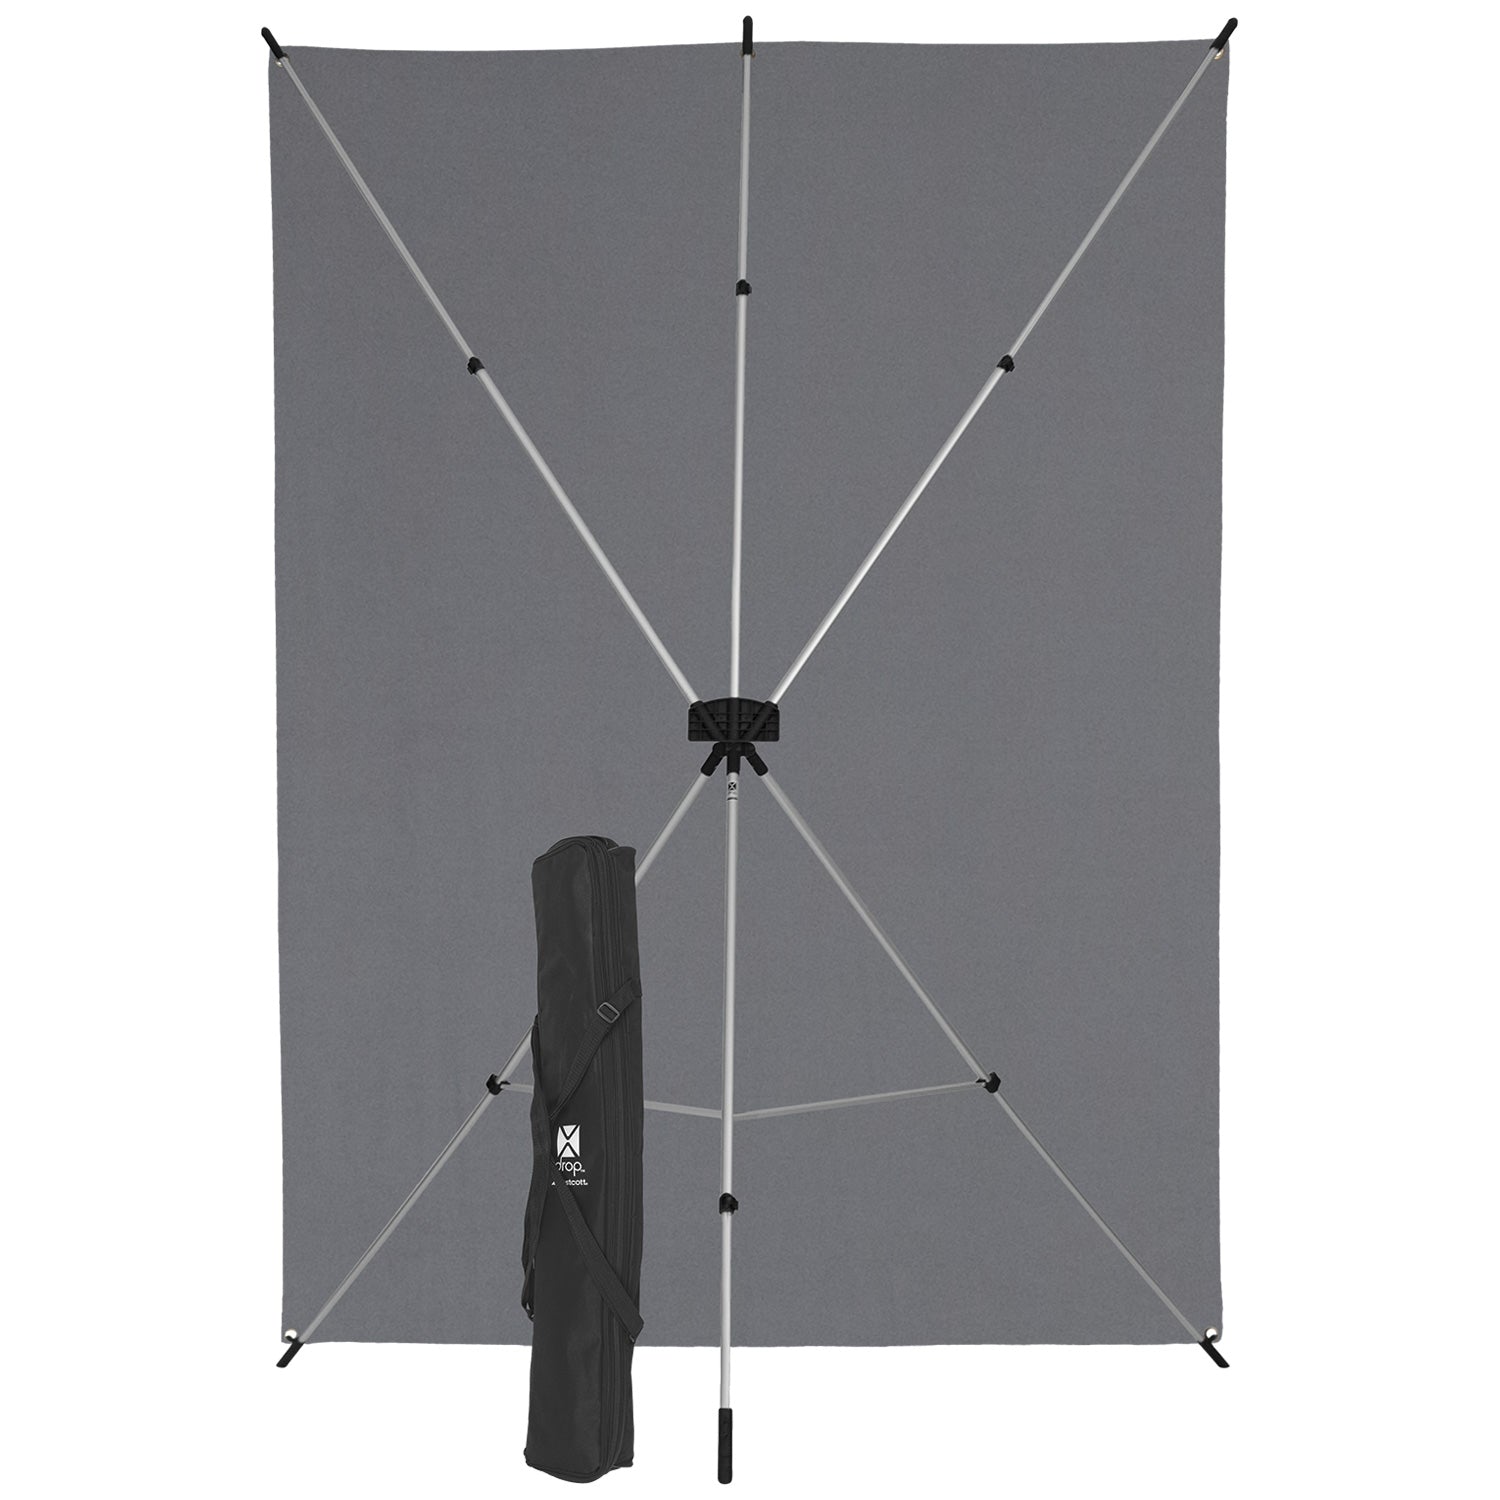 uLite 2-Light Umbrella Kit with X-Drop Backdrop & Stands